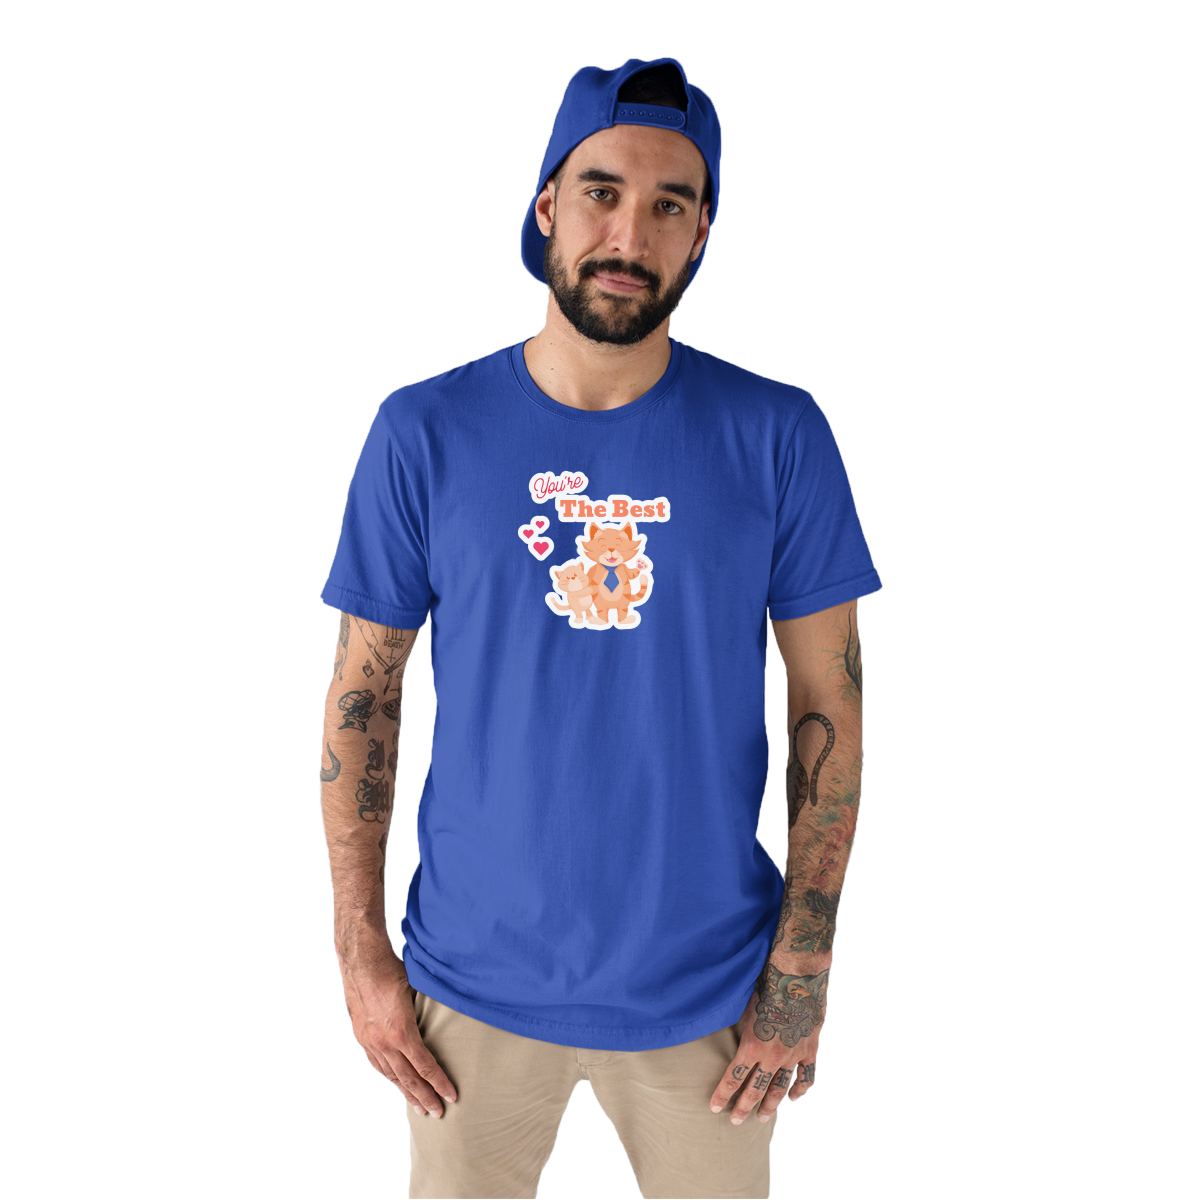 You are the Best Men's T-shirt | Blue